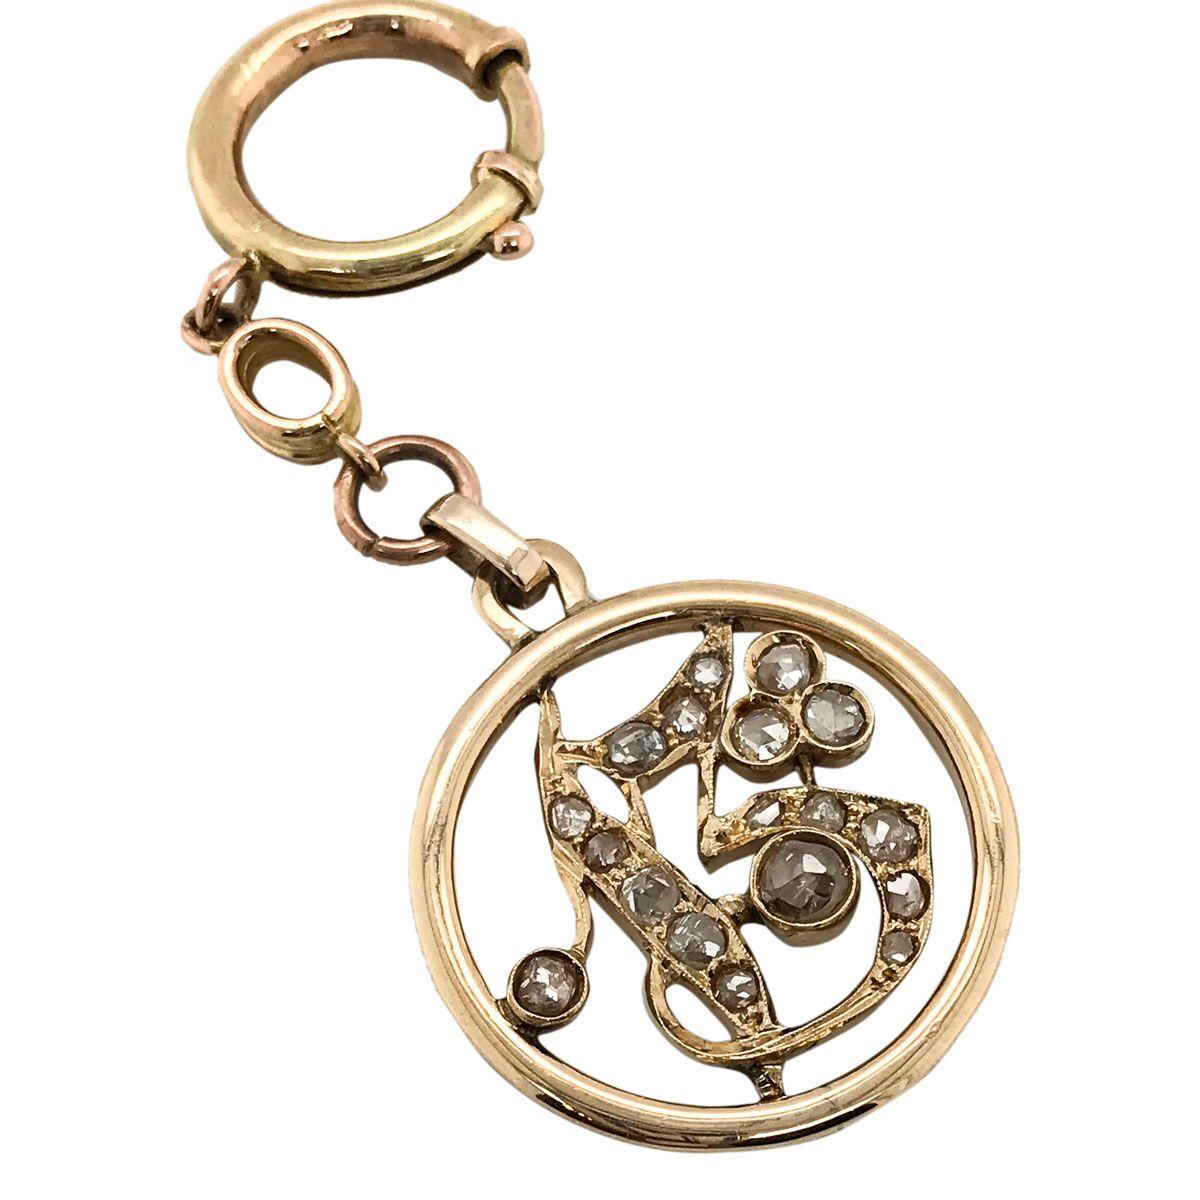 1.05 Carat Rose Cut Diamond Gold Key Chain and Pendant For Sale 2